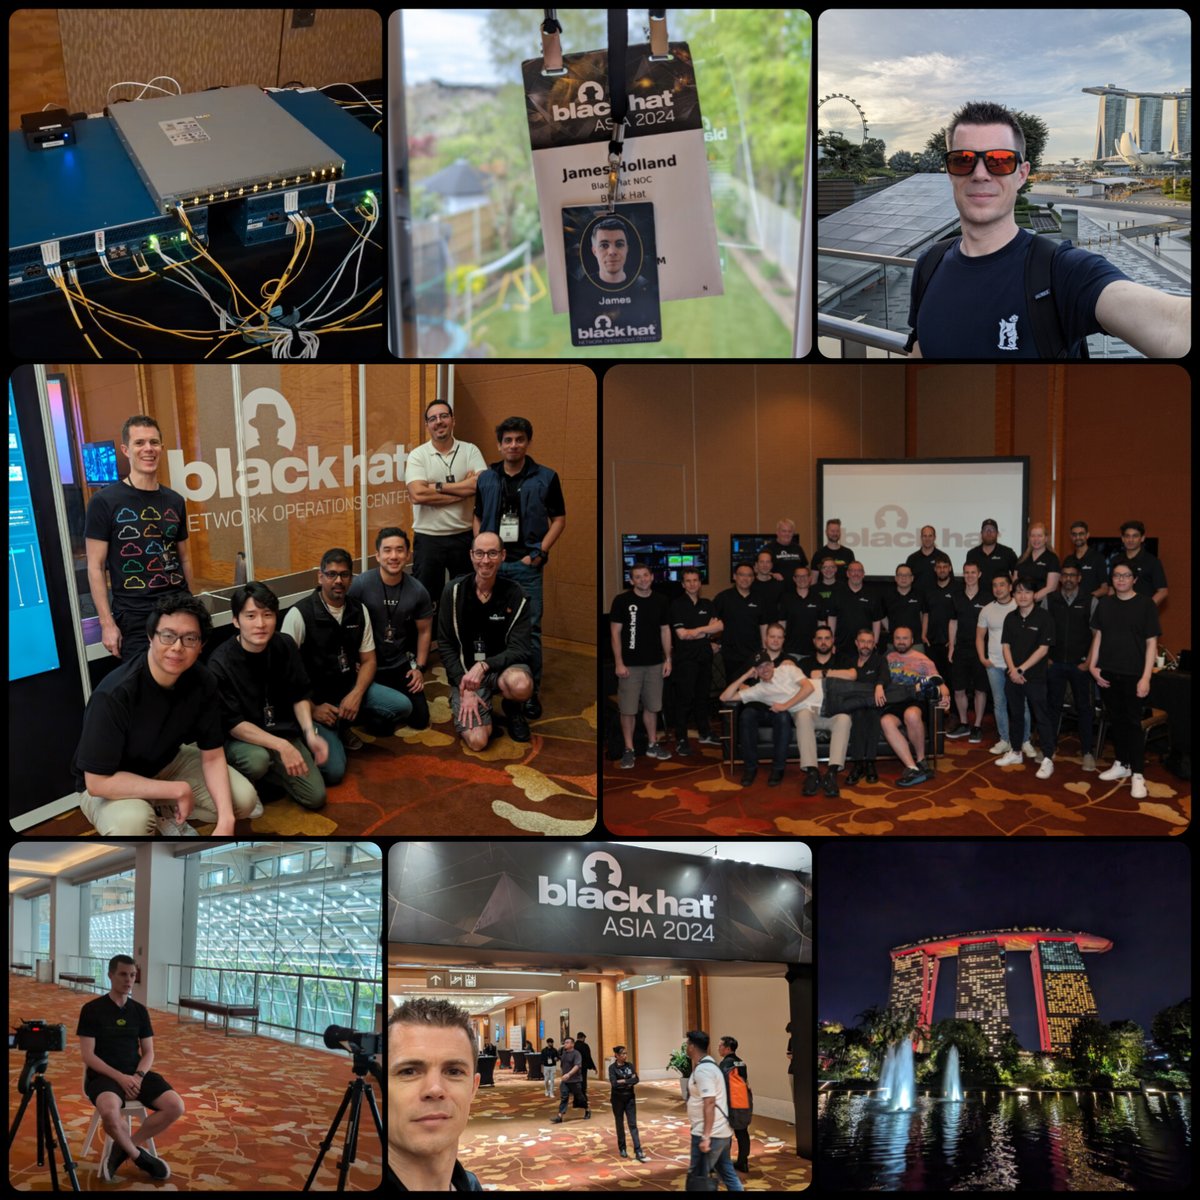 Thank you to @BlackHatEvents for again choosing @PaloAltoNtwks for the operations centre of the Asia 2024 conference! It was awesome to see everyone again, build an infra in 1 day, and then a smooth operation for the week #OpsForLife #BlackHat #BHAsia #LifeatPaloAltoNetworks